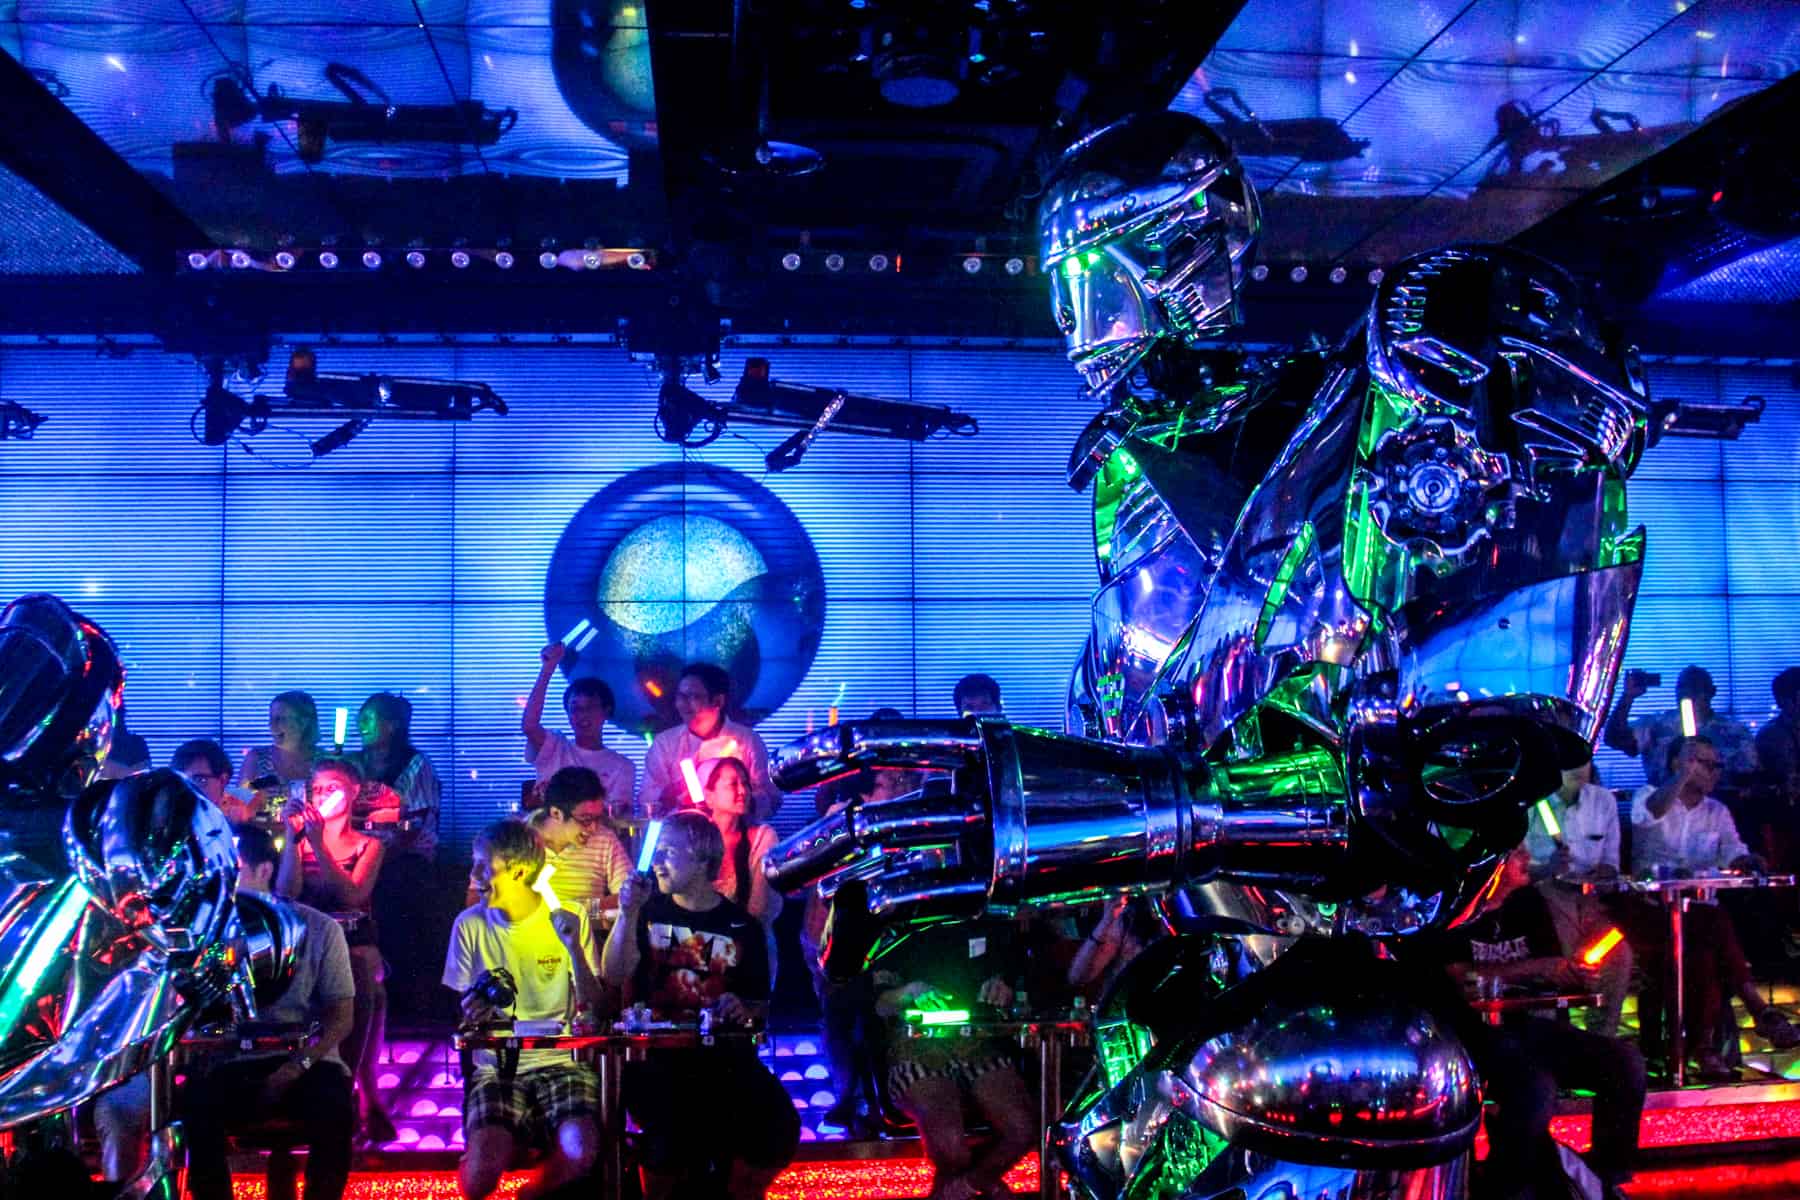 An audience waves neon glow sticks while watching a giant robot perform at a show in Tokyo. 